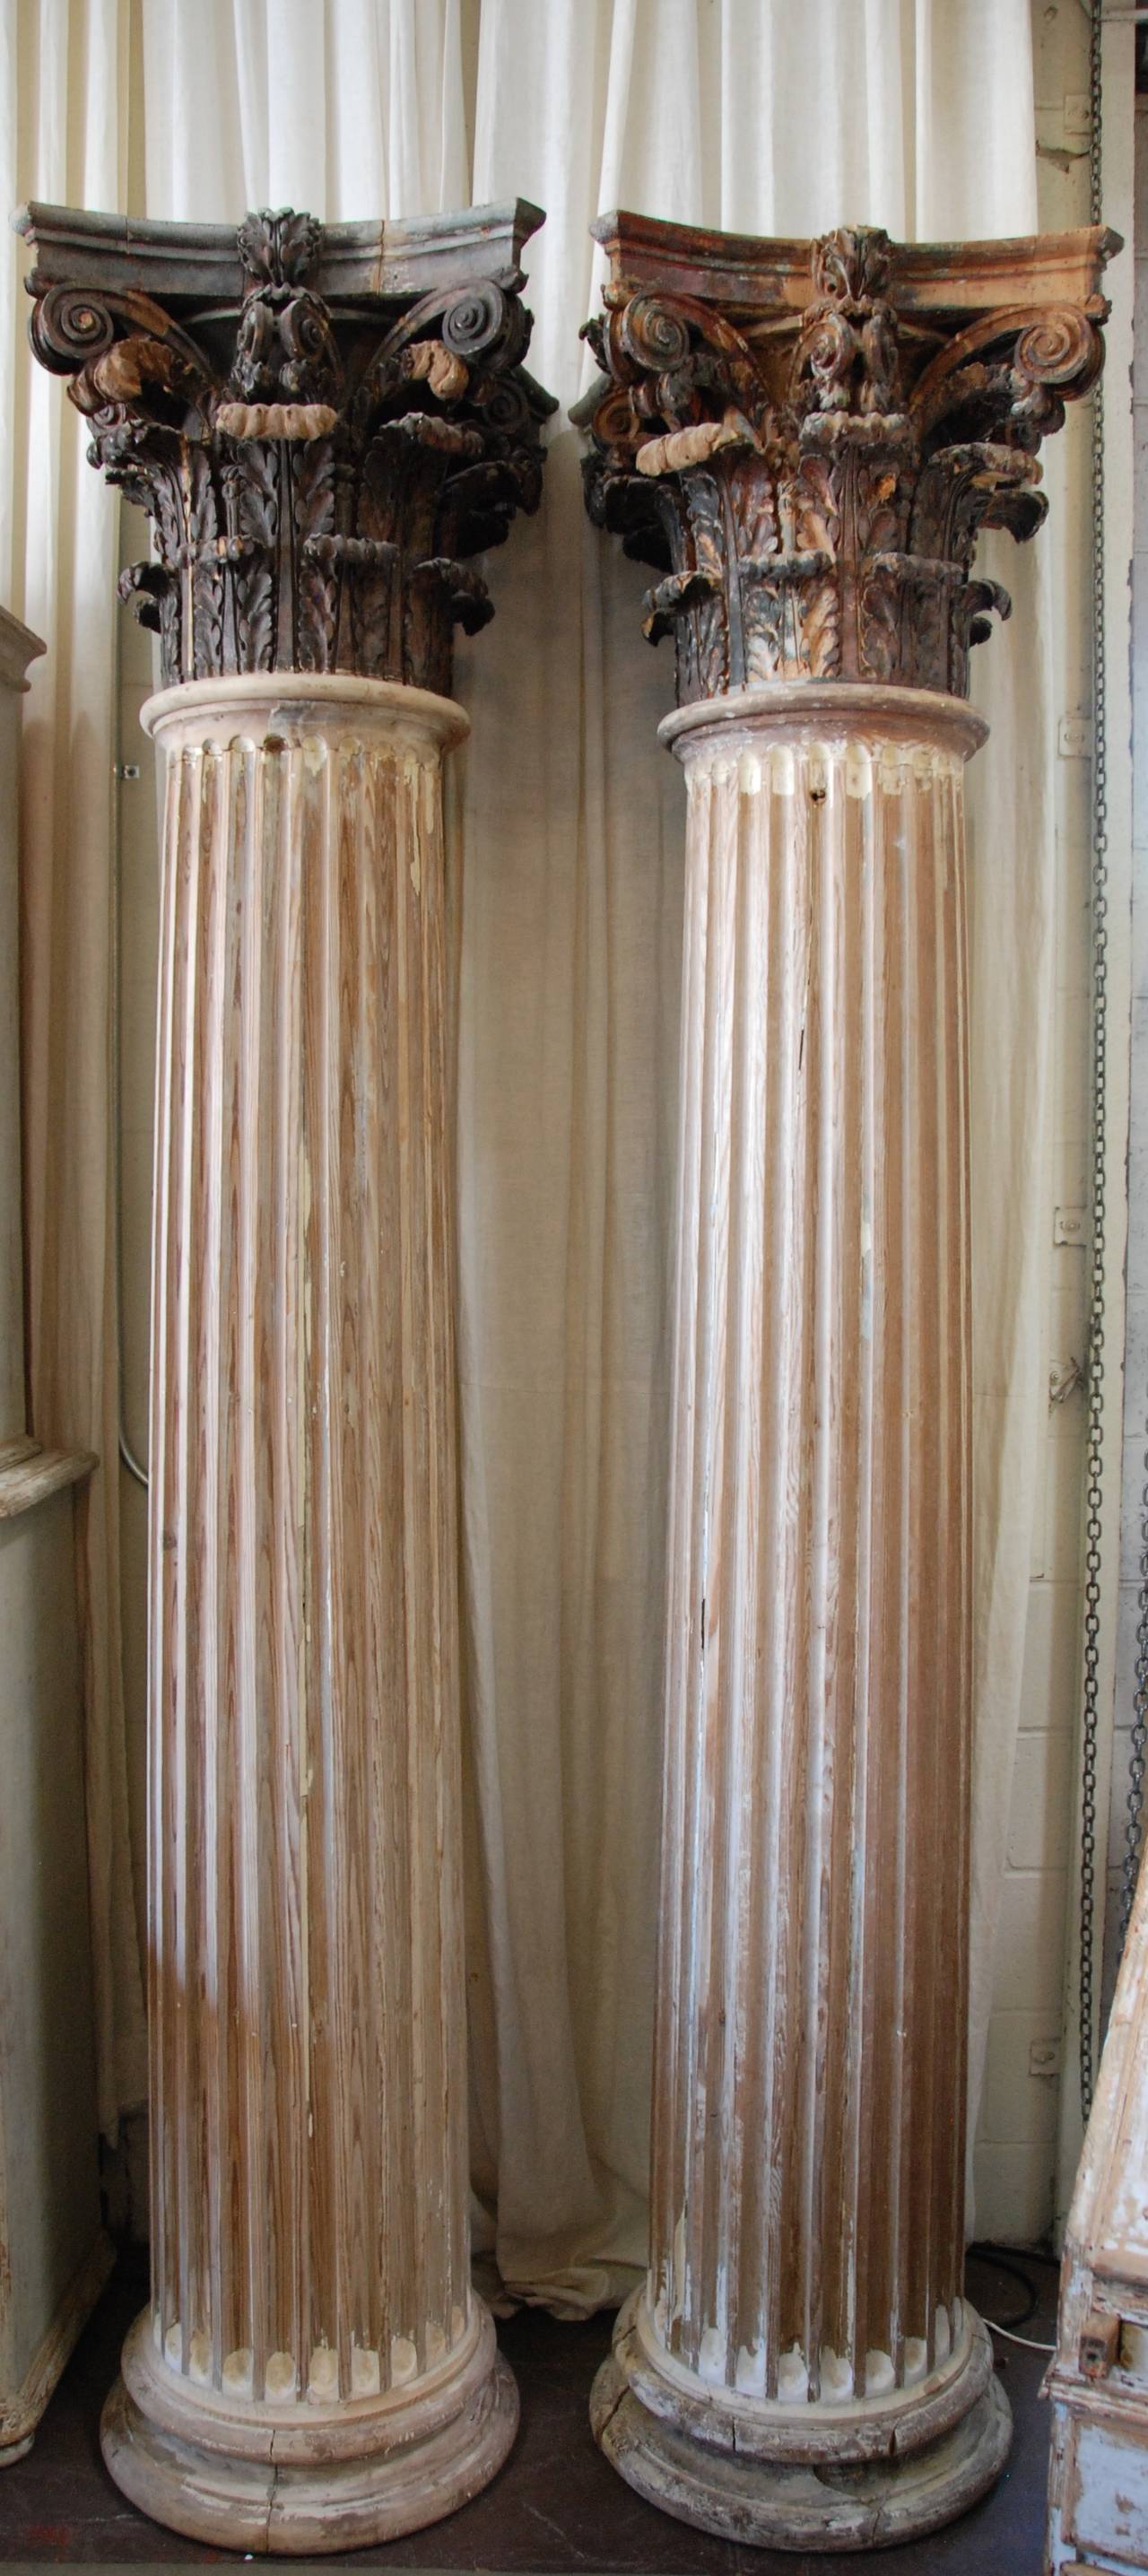 Grand pair of 19th century French wood columns. Great aged patina.